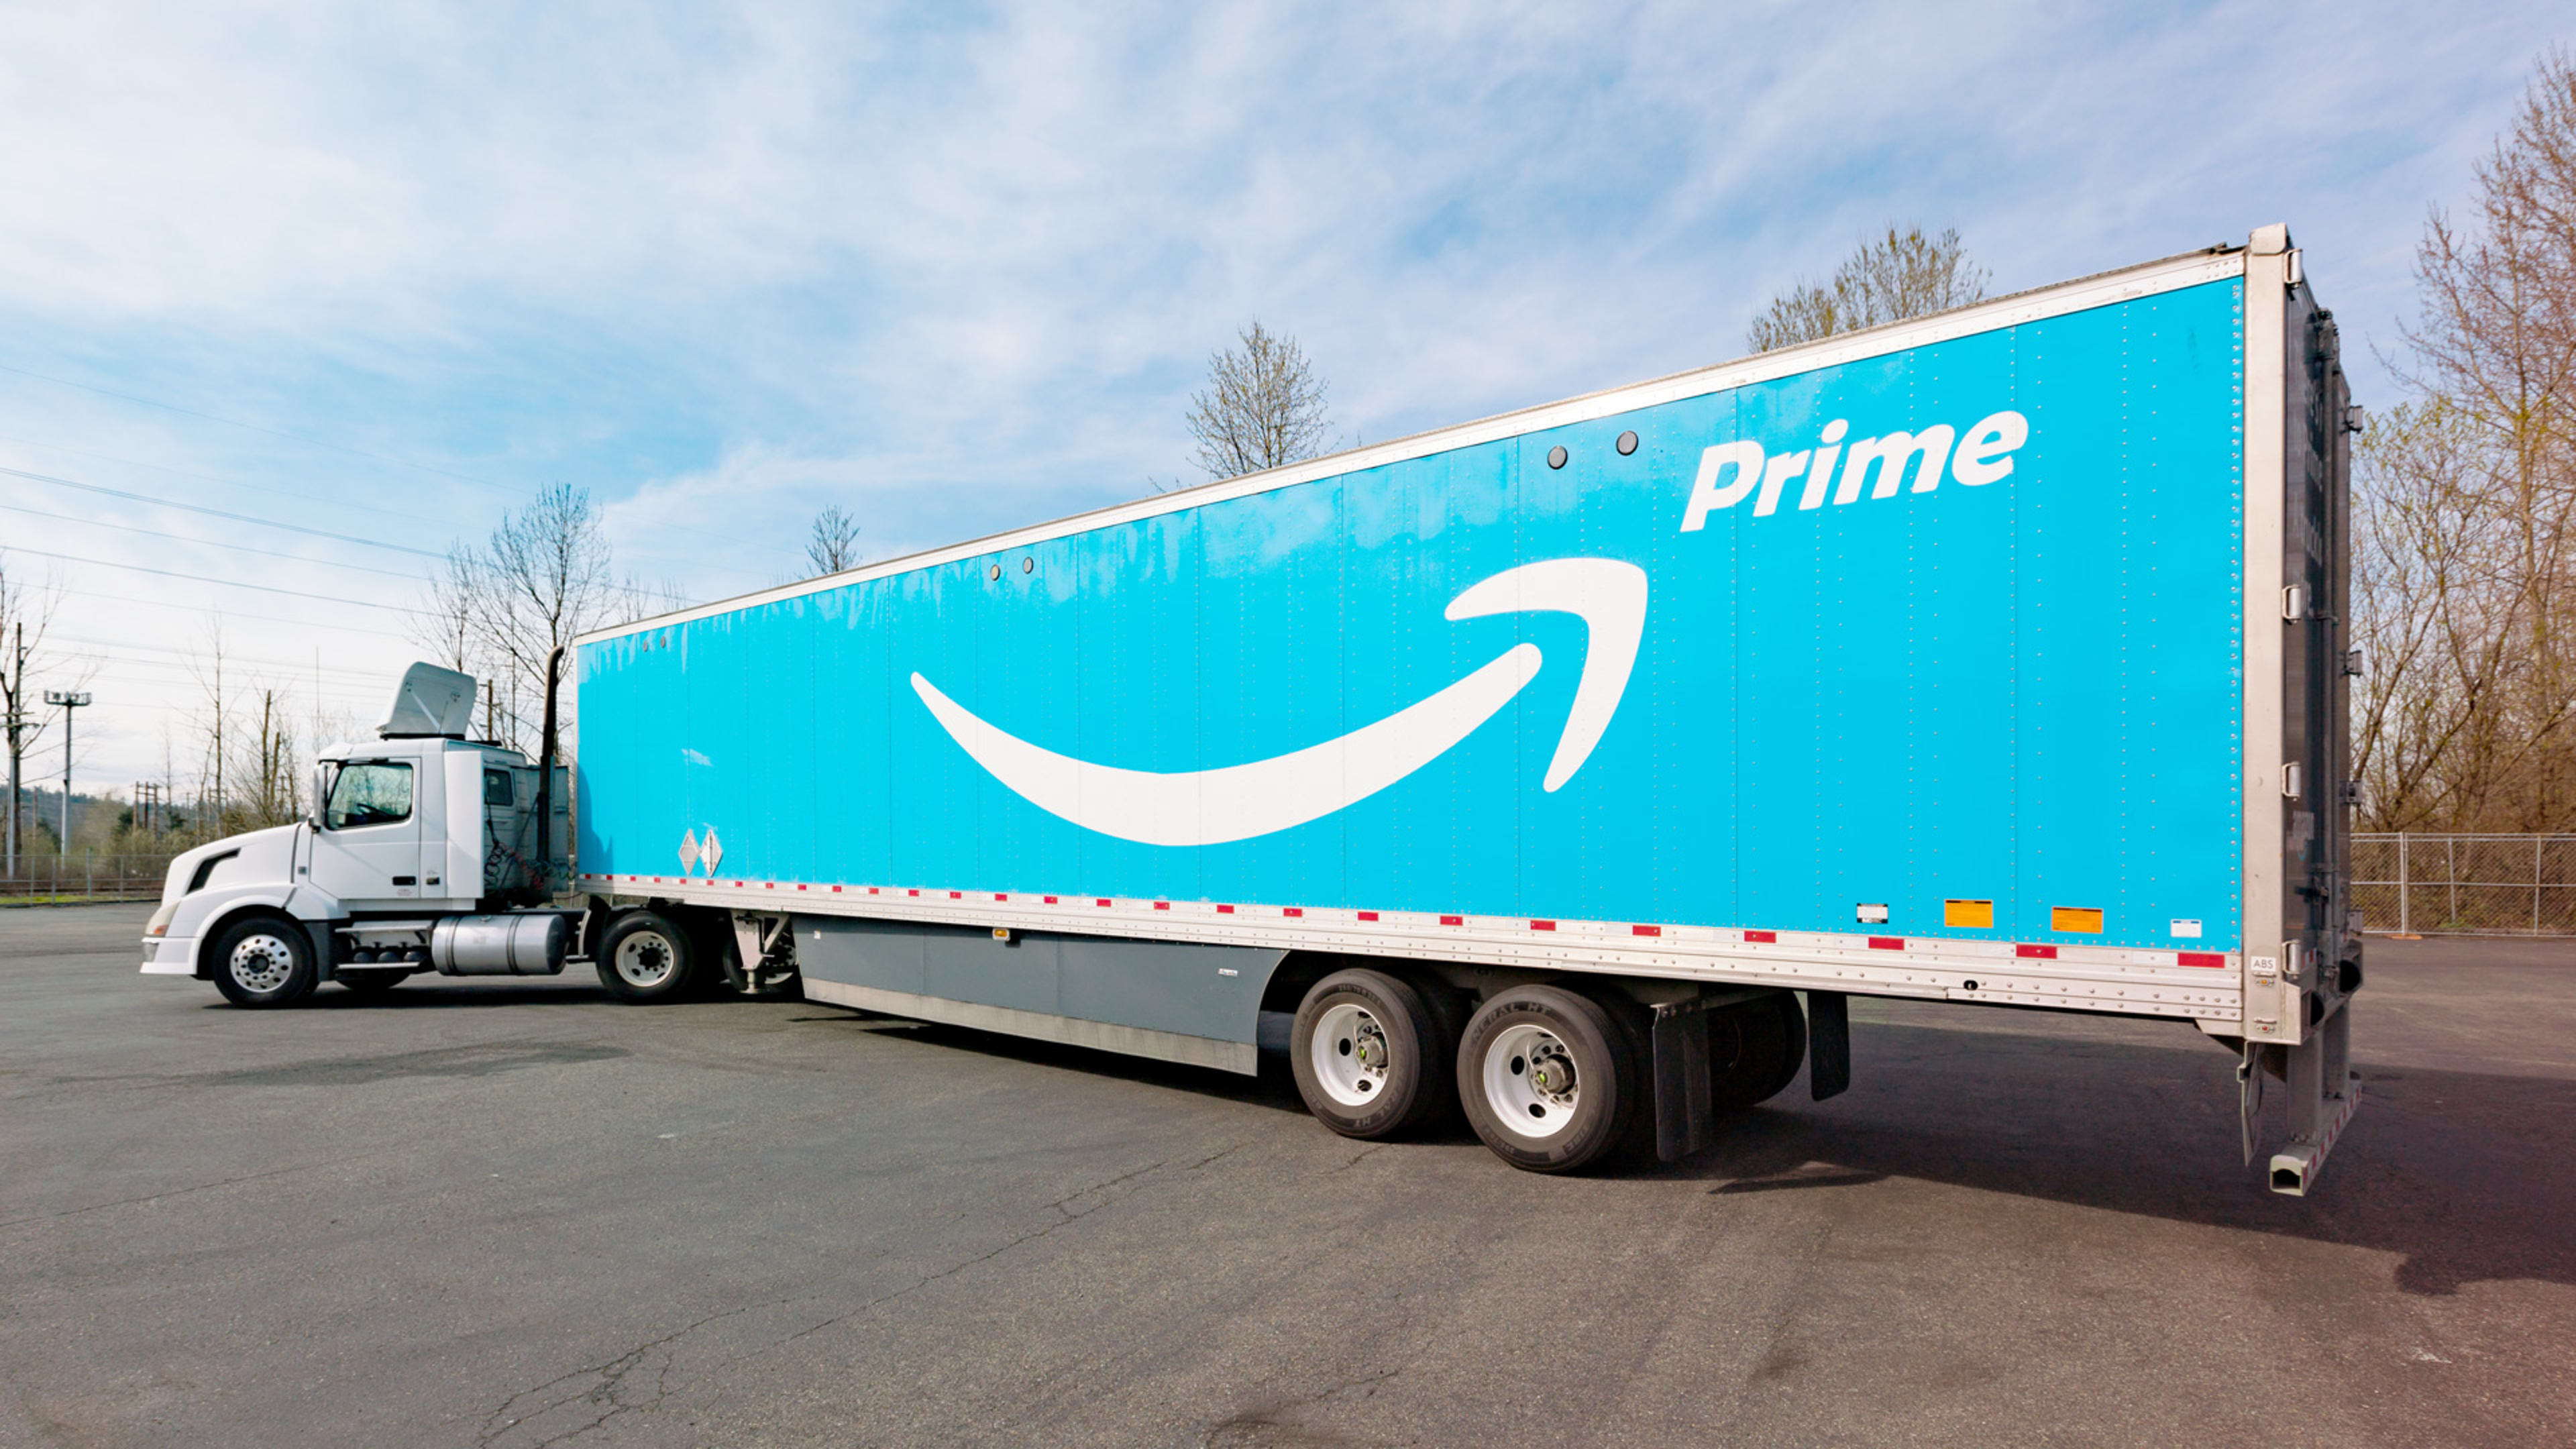 The price of your Amazon Prime subscription is raising to $119